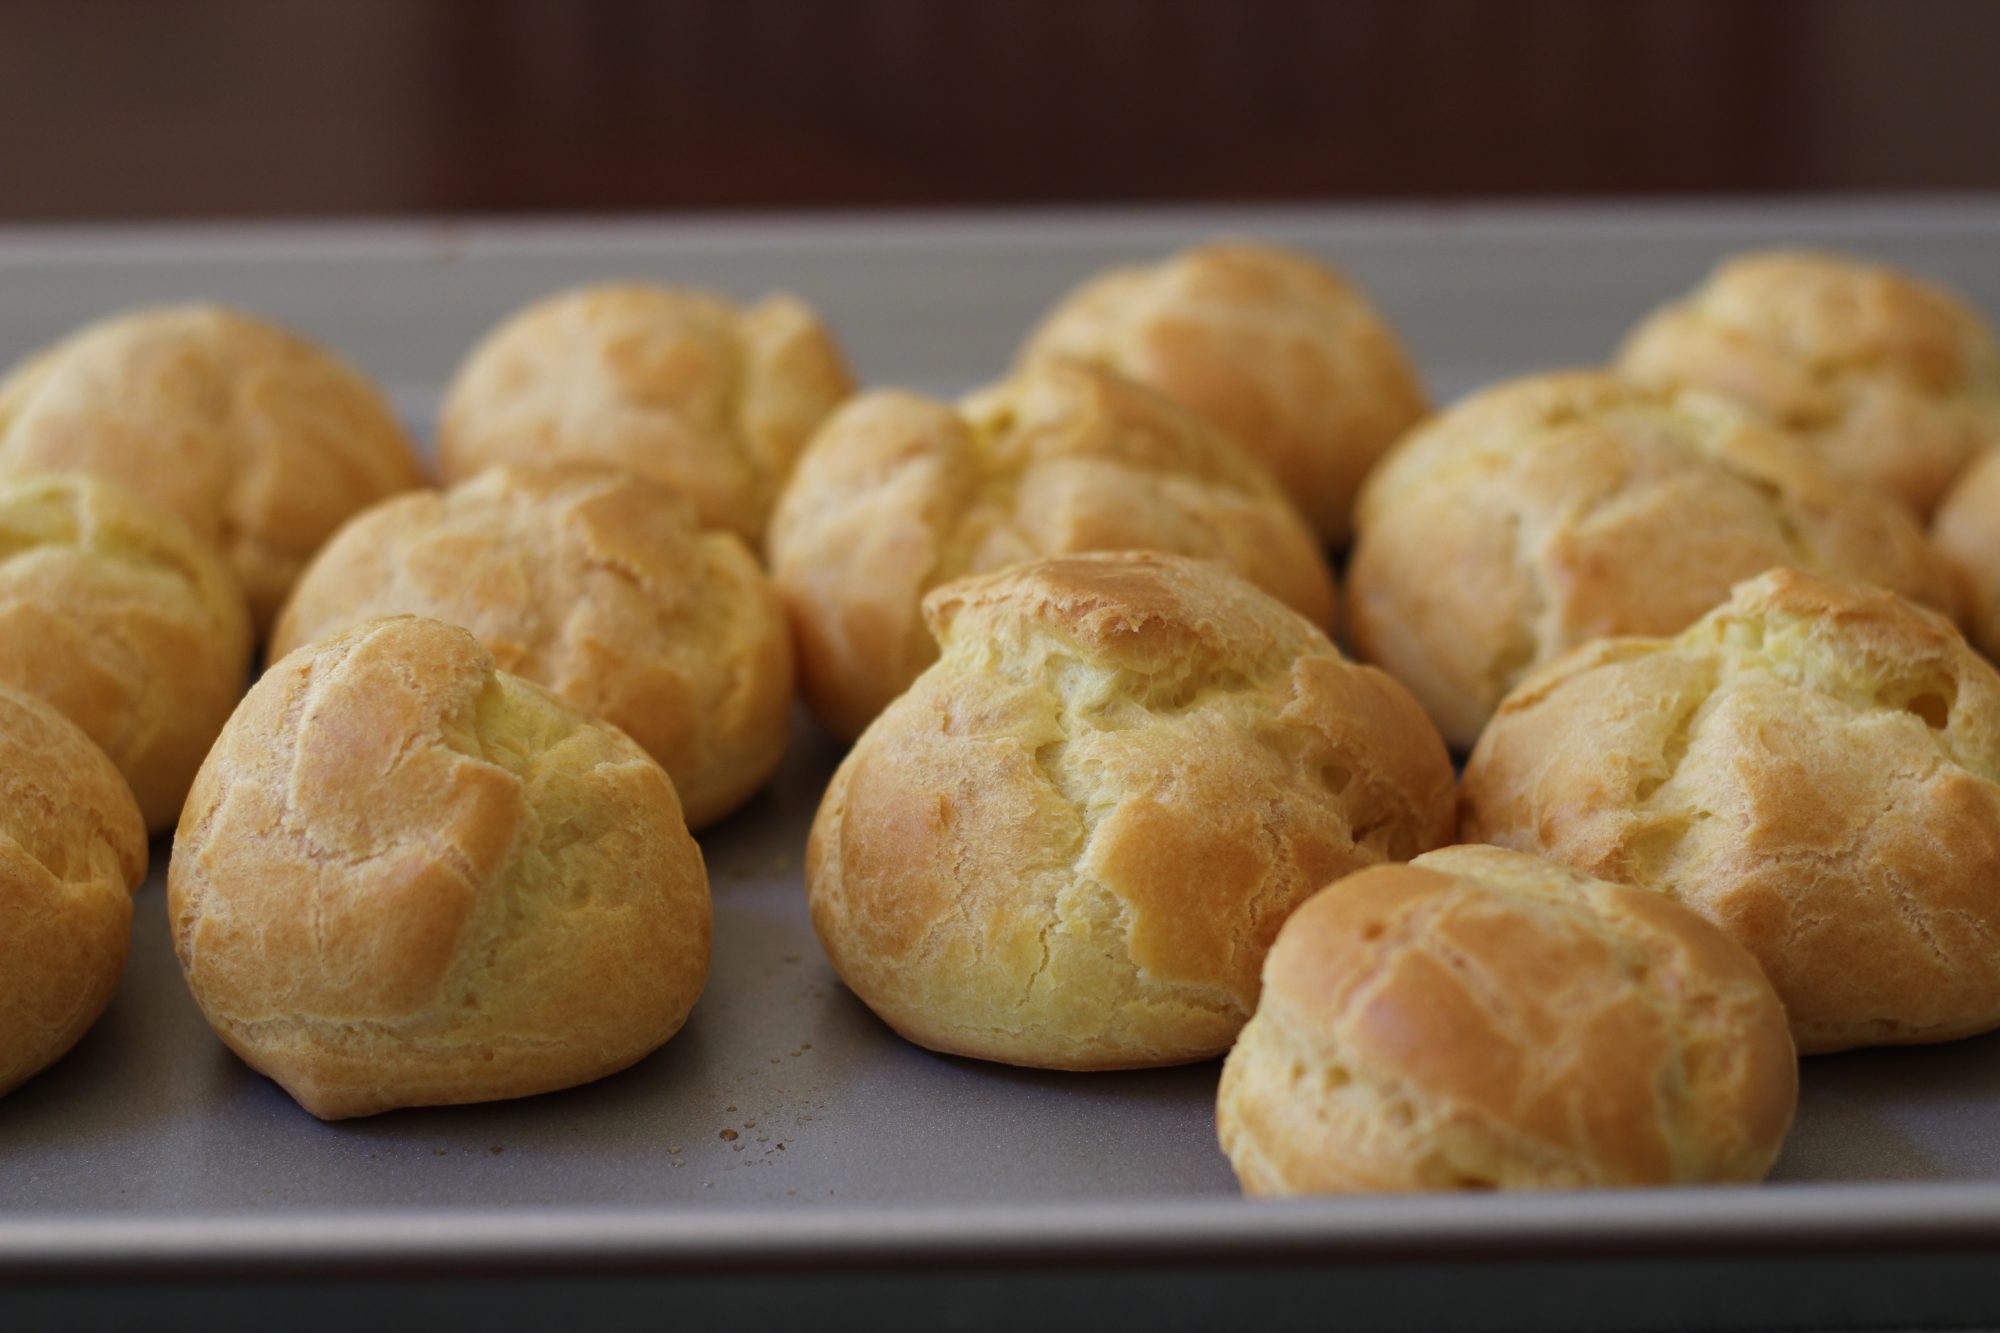 The puff balls should be crisp on the outside when baked.